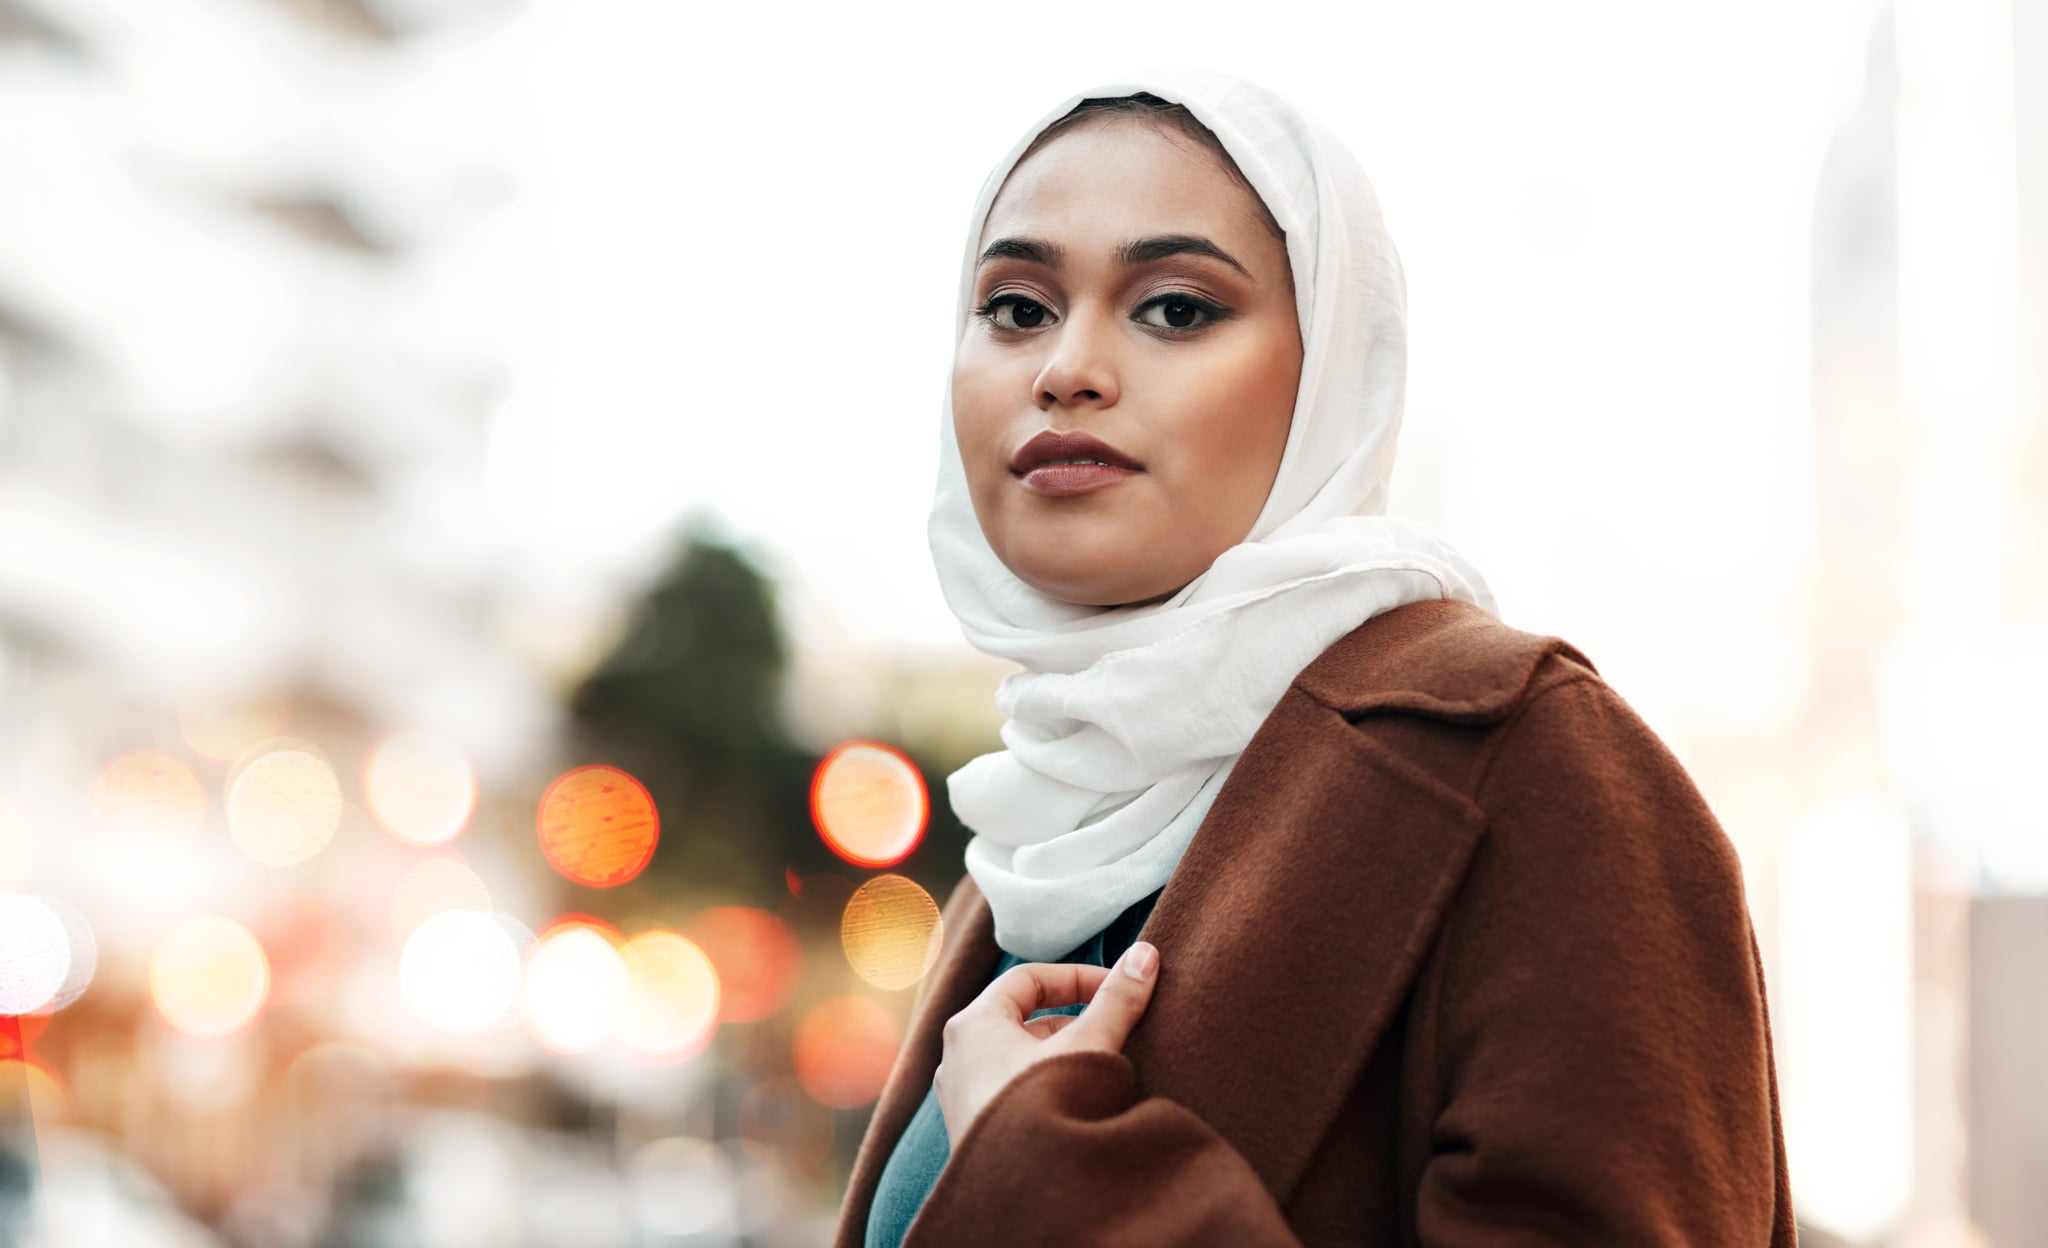 shot of a woman wearing a hijab and standing alone to illustrate high-functioning anxiety